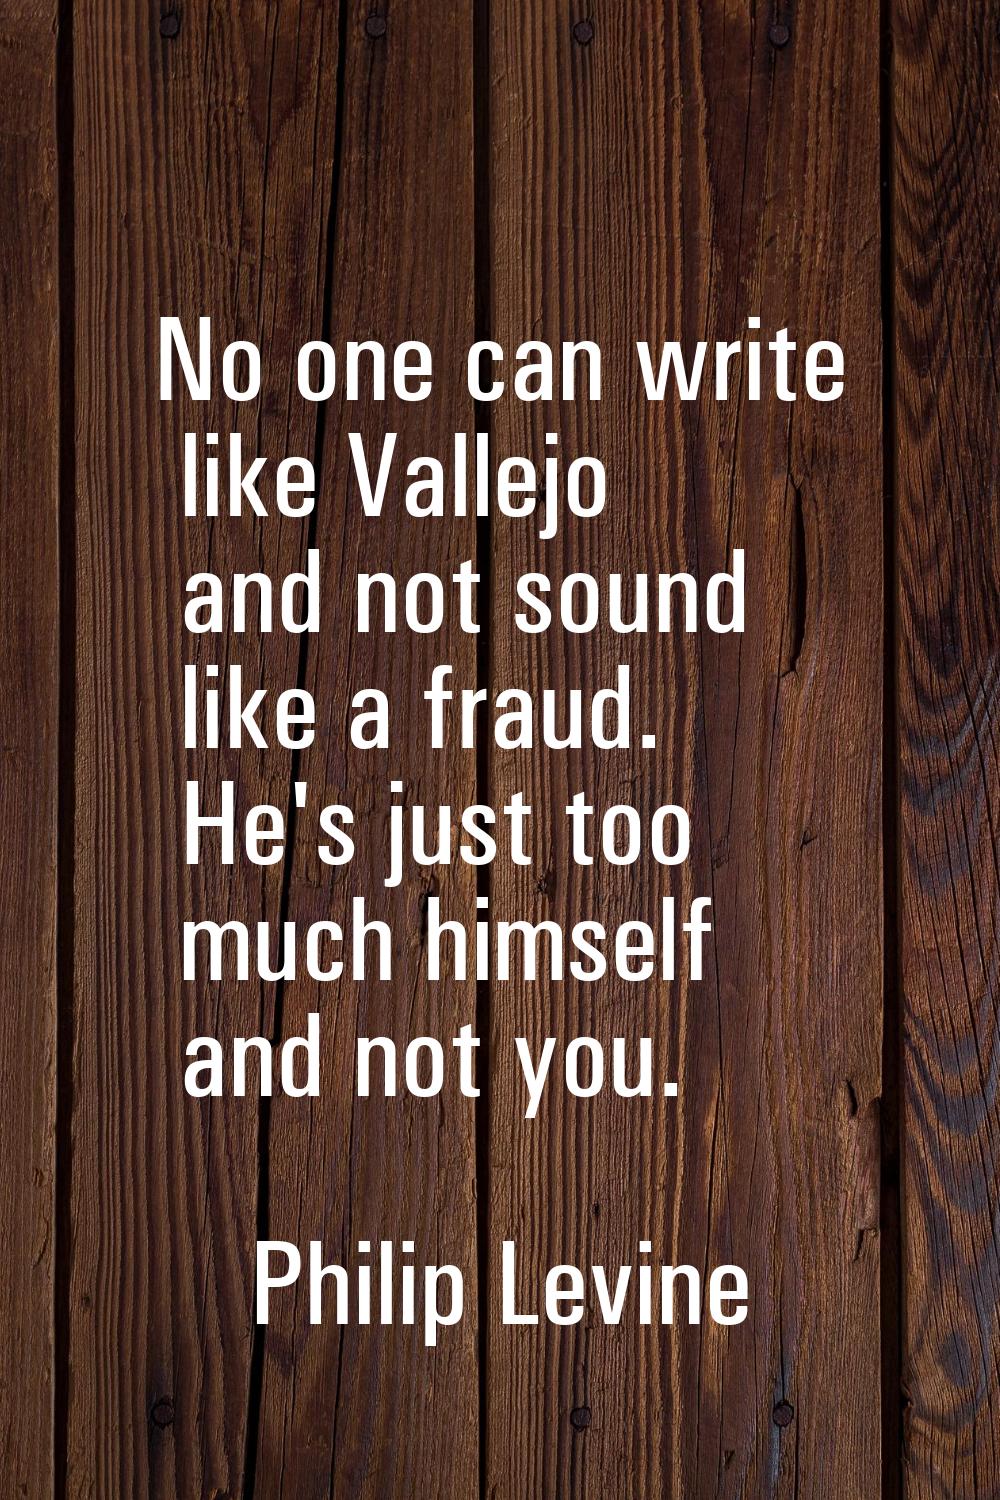 No one can write like Vallejo and not sound like a fraud. He's just too much himself and not you.